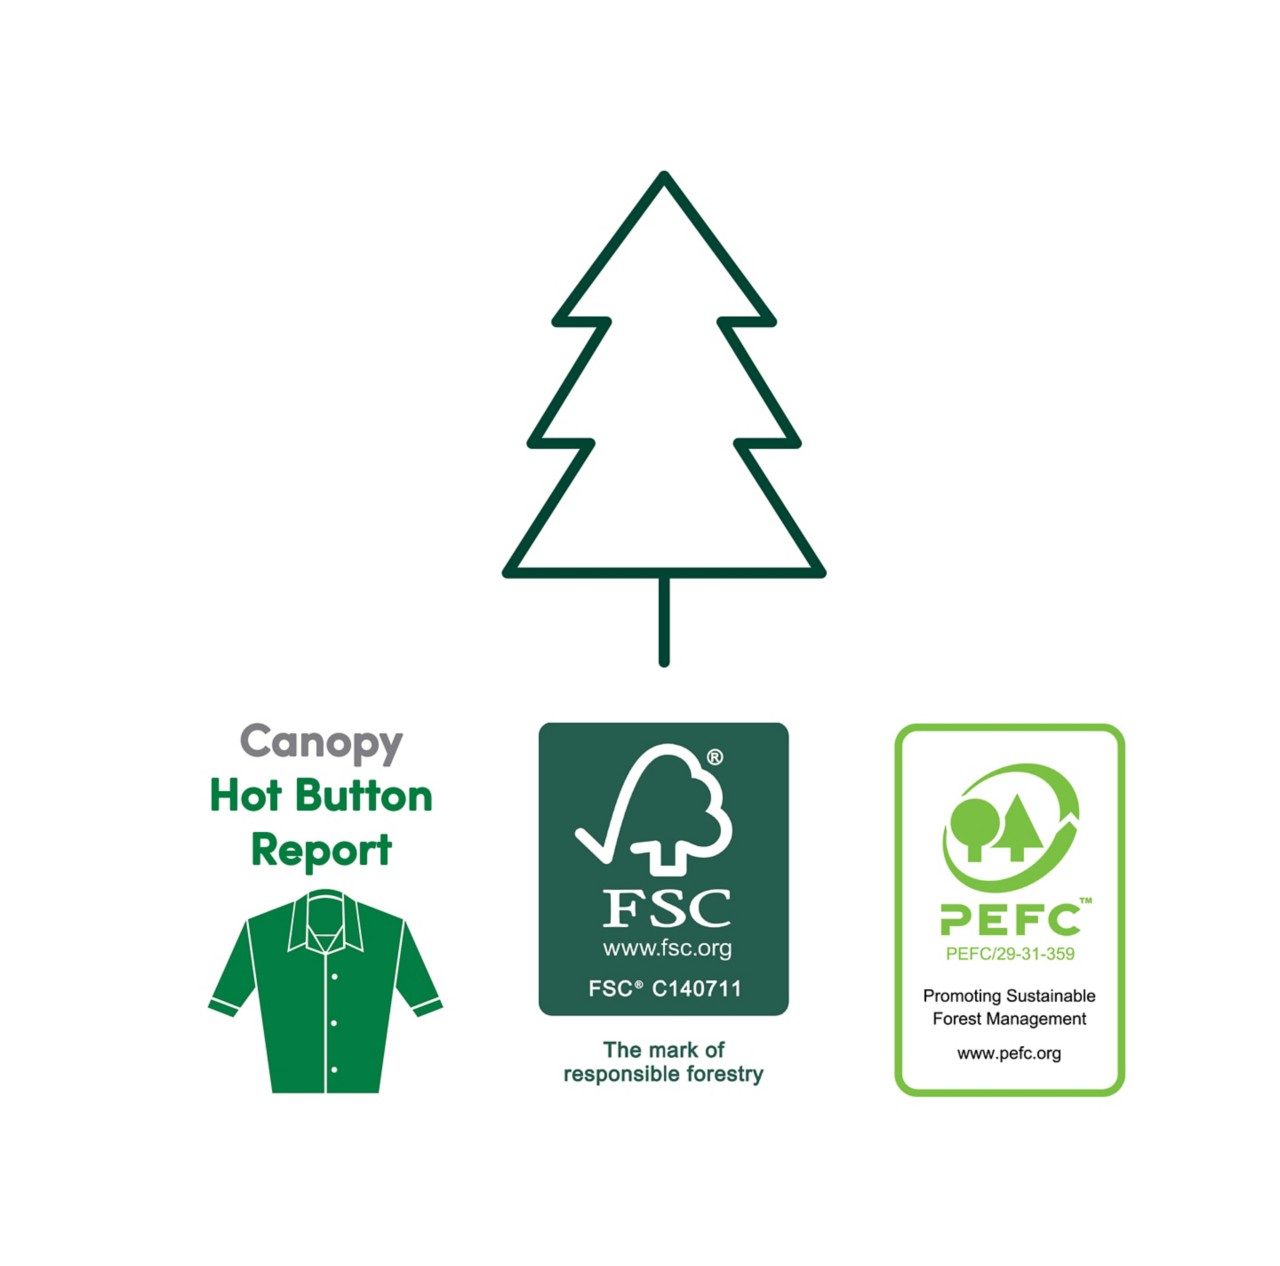 A tree icon with logos for Canopy, FSC and PEFC. 